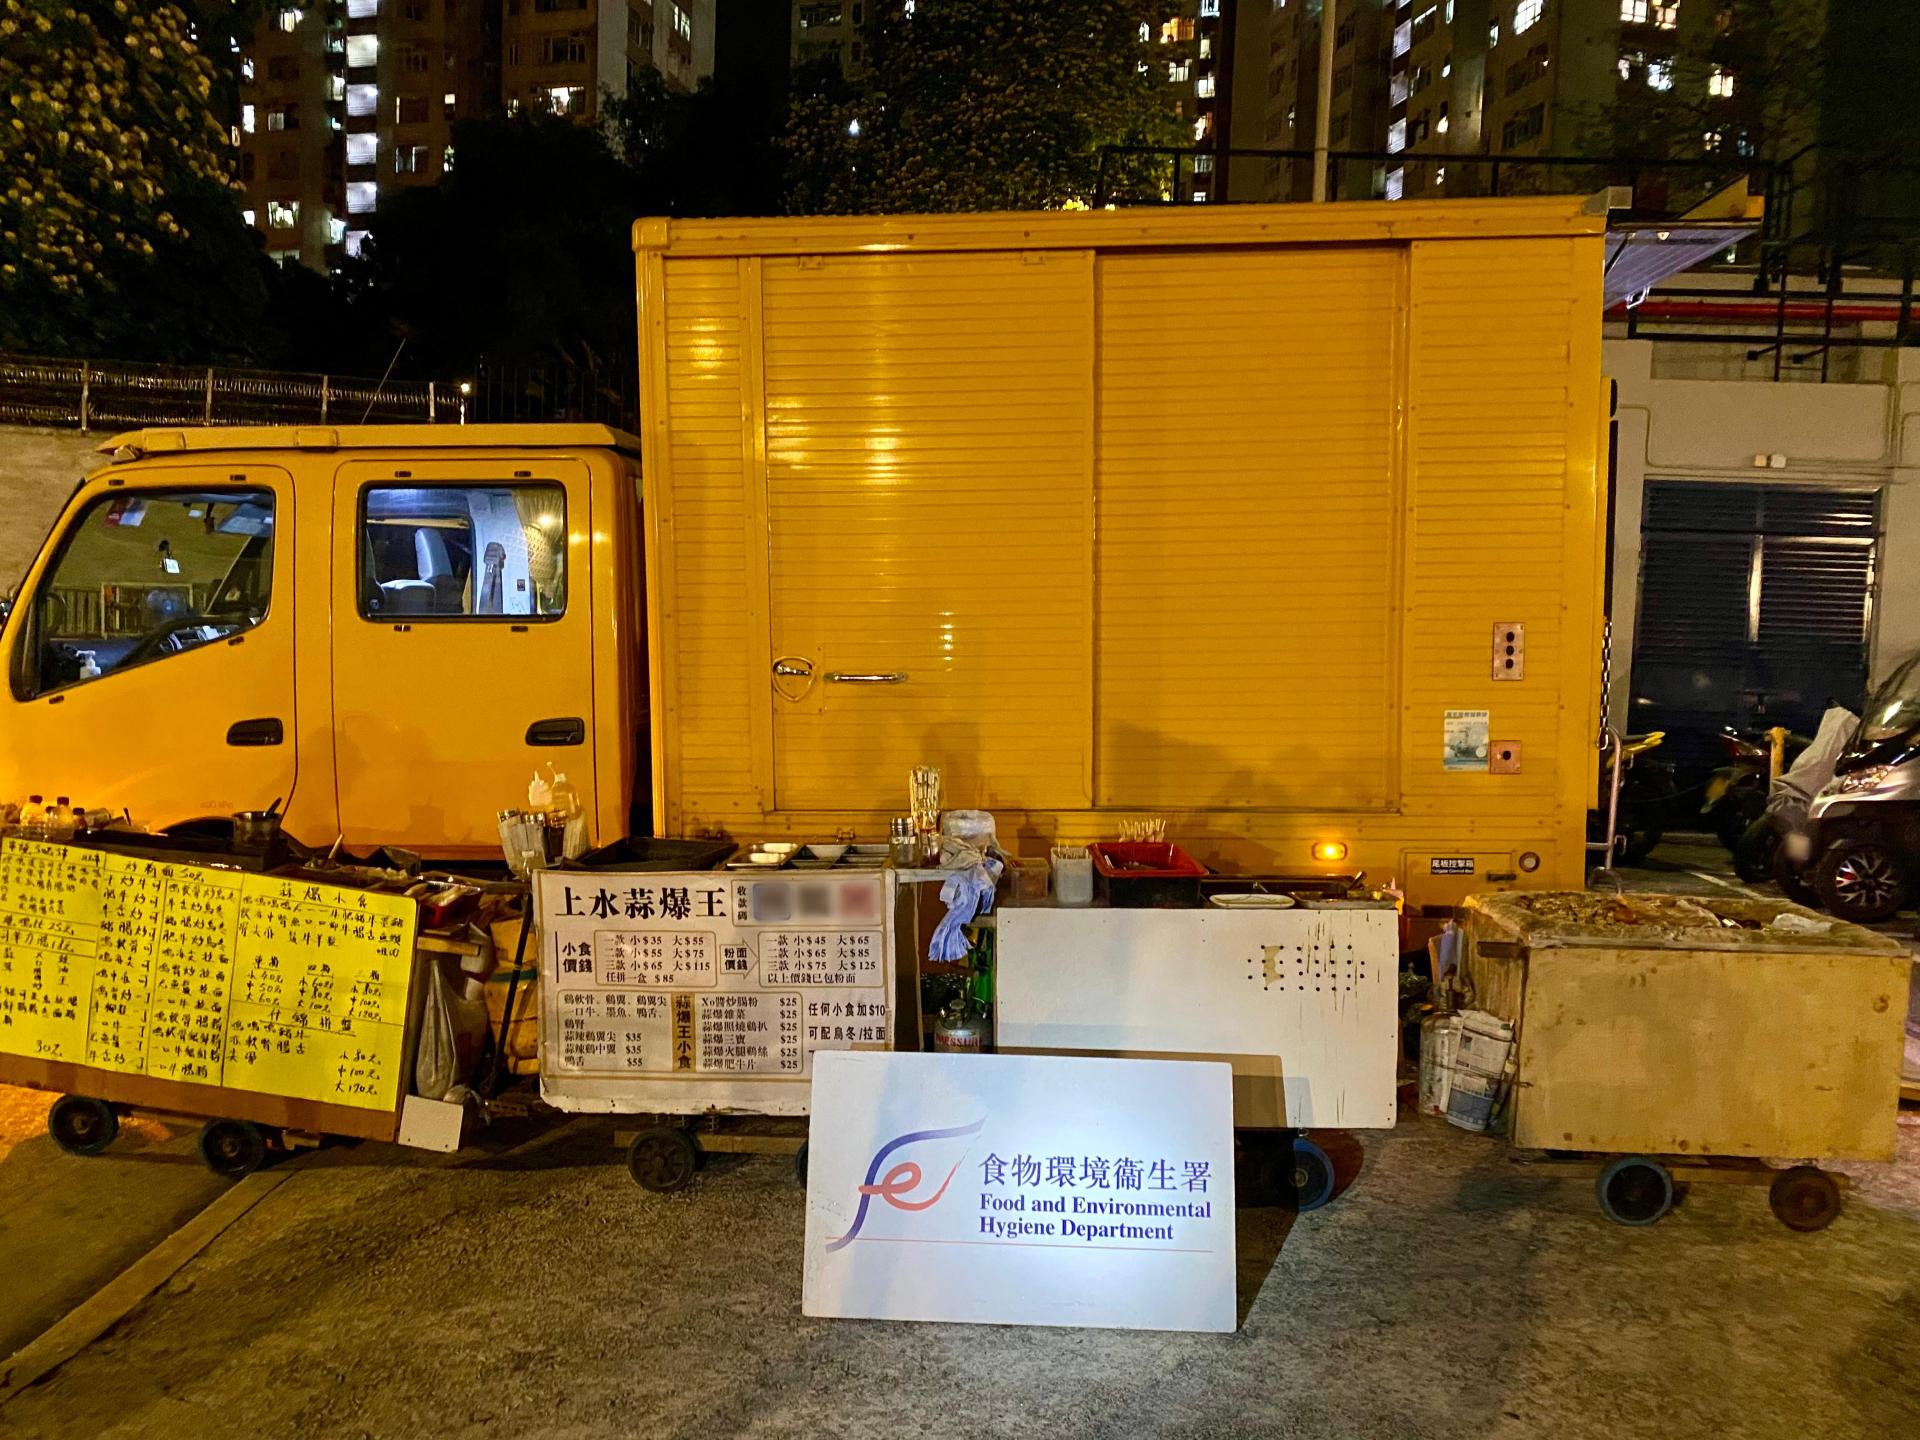 A spokesman for the Food and Environmental Hygiene Department (FEHD) said today (April 18) that to enhance evidence collection efficiency and minimise safety risks to passers-by and law enforcement officers, the FEHD conducted a pilot enforcement operation codenamed "Nighthawk" against suspected organised unlicensed cooked food hawking activities in the area of Choi Yuen Road near Po Shek Wu Estate Ancillary Facilities Block in Sheung Shui last night (April 17). Officers used video recording devices to document illegal acts and gather information on unlicensed cooked food hawkers there as evidence. Photo shows the cooked food trolleys and relevant equipment seized during the operation.